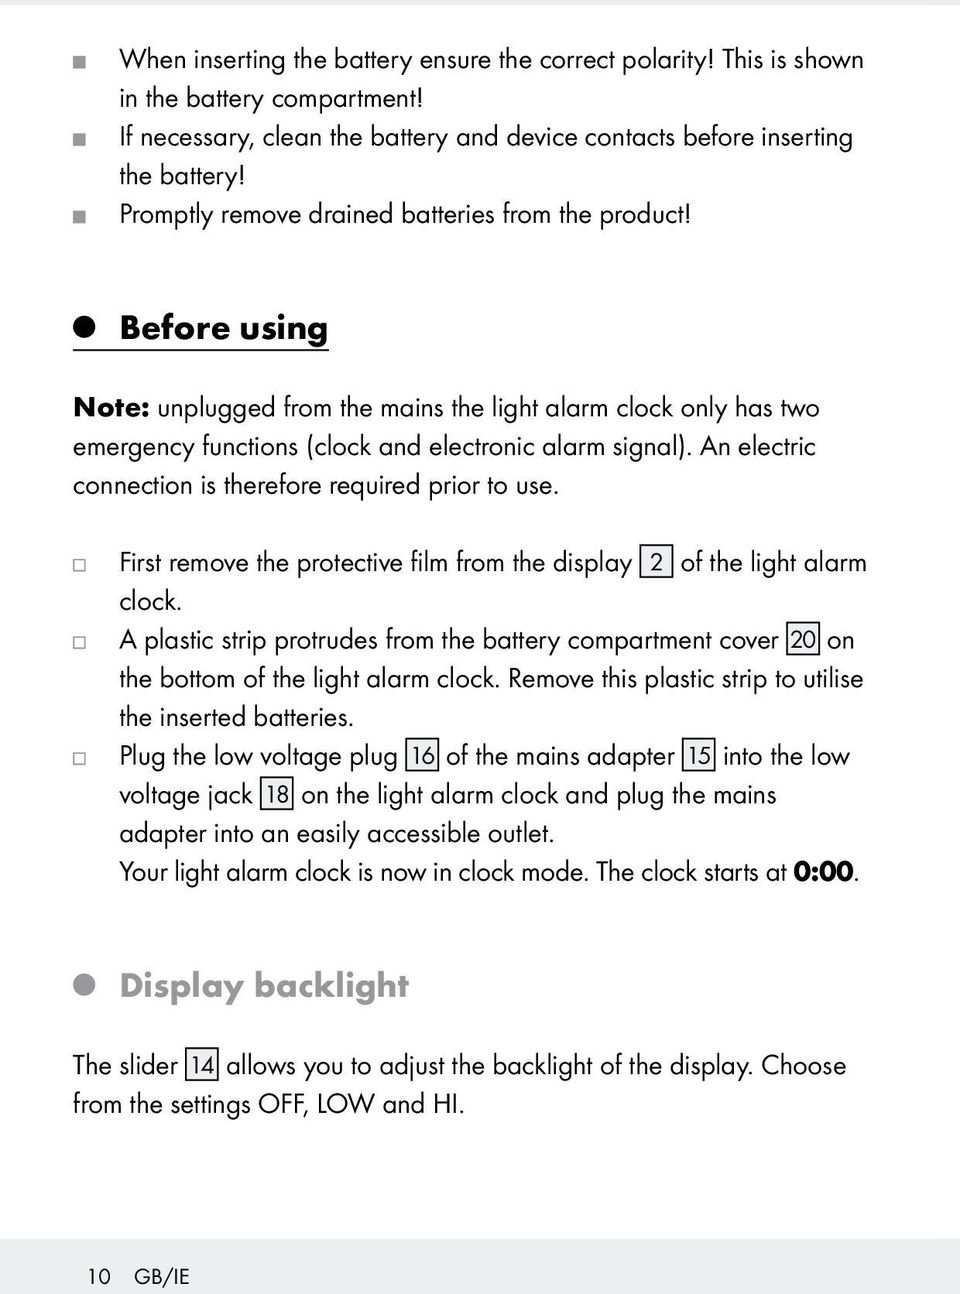 An electric connection is therefore required prior to use. First remove the protective film from the display 2 of the light alarm clock.